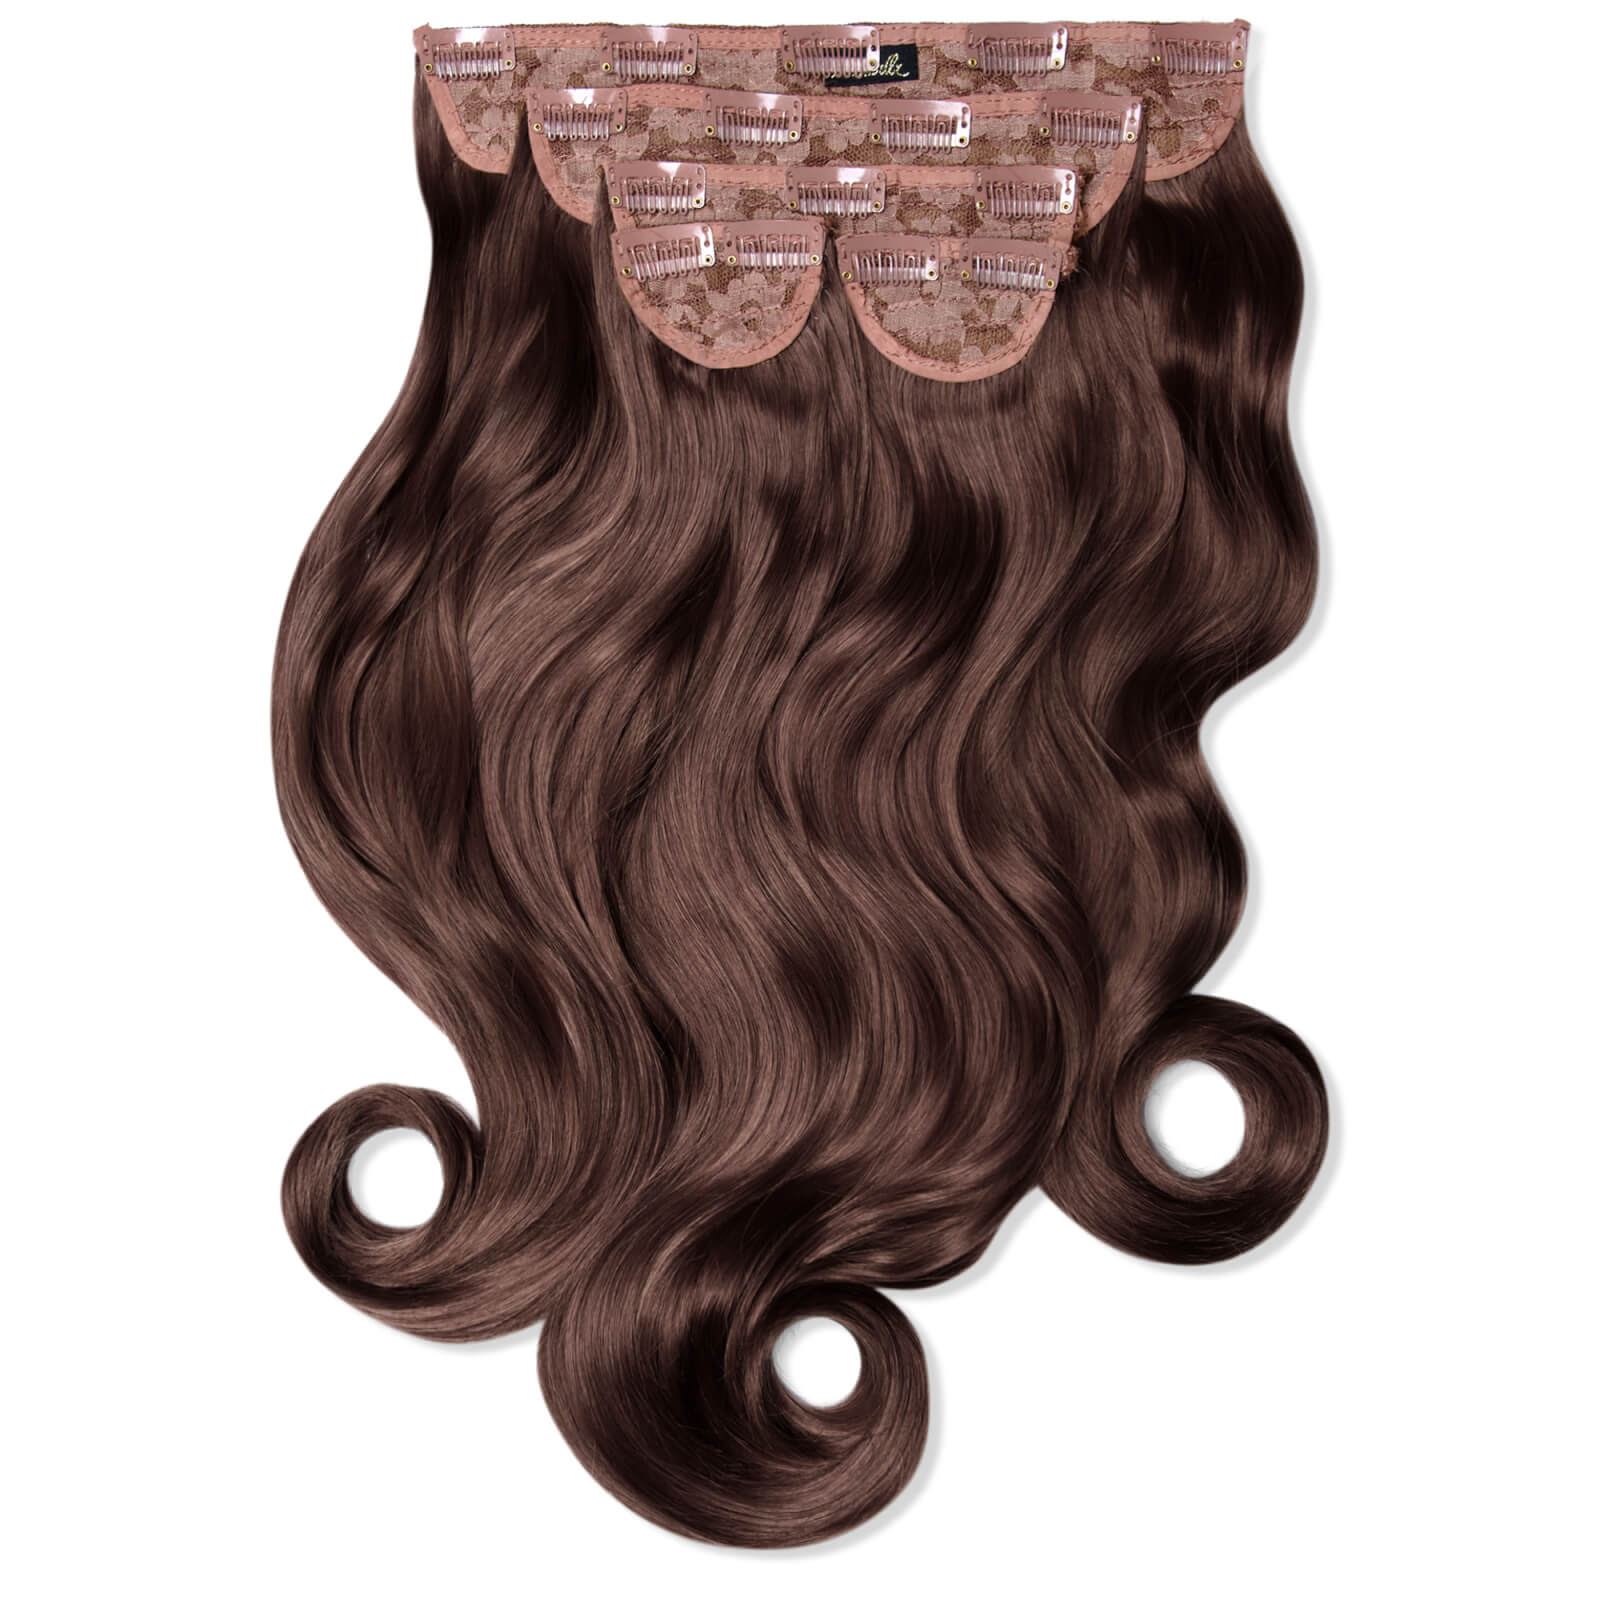 Lullabellz Super Thick 22  5 Piece Curly Clip In Extensions (various Shades) - Chestnut